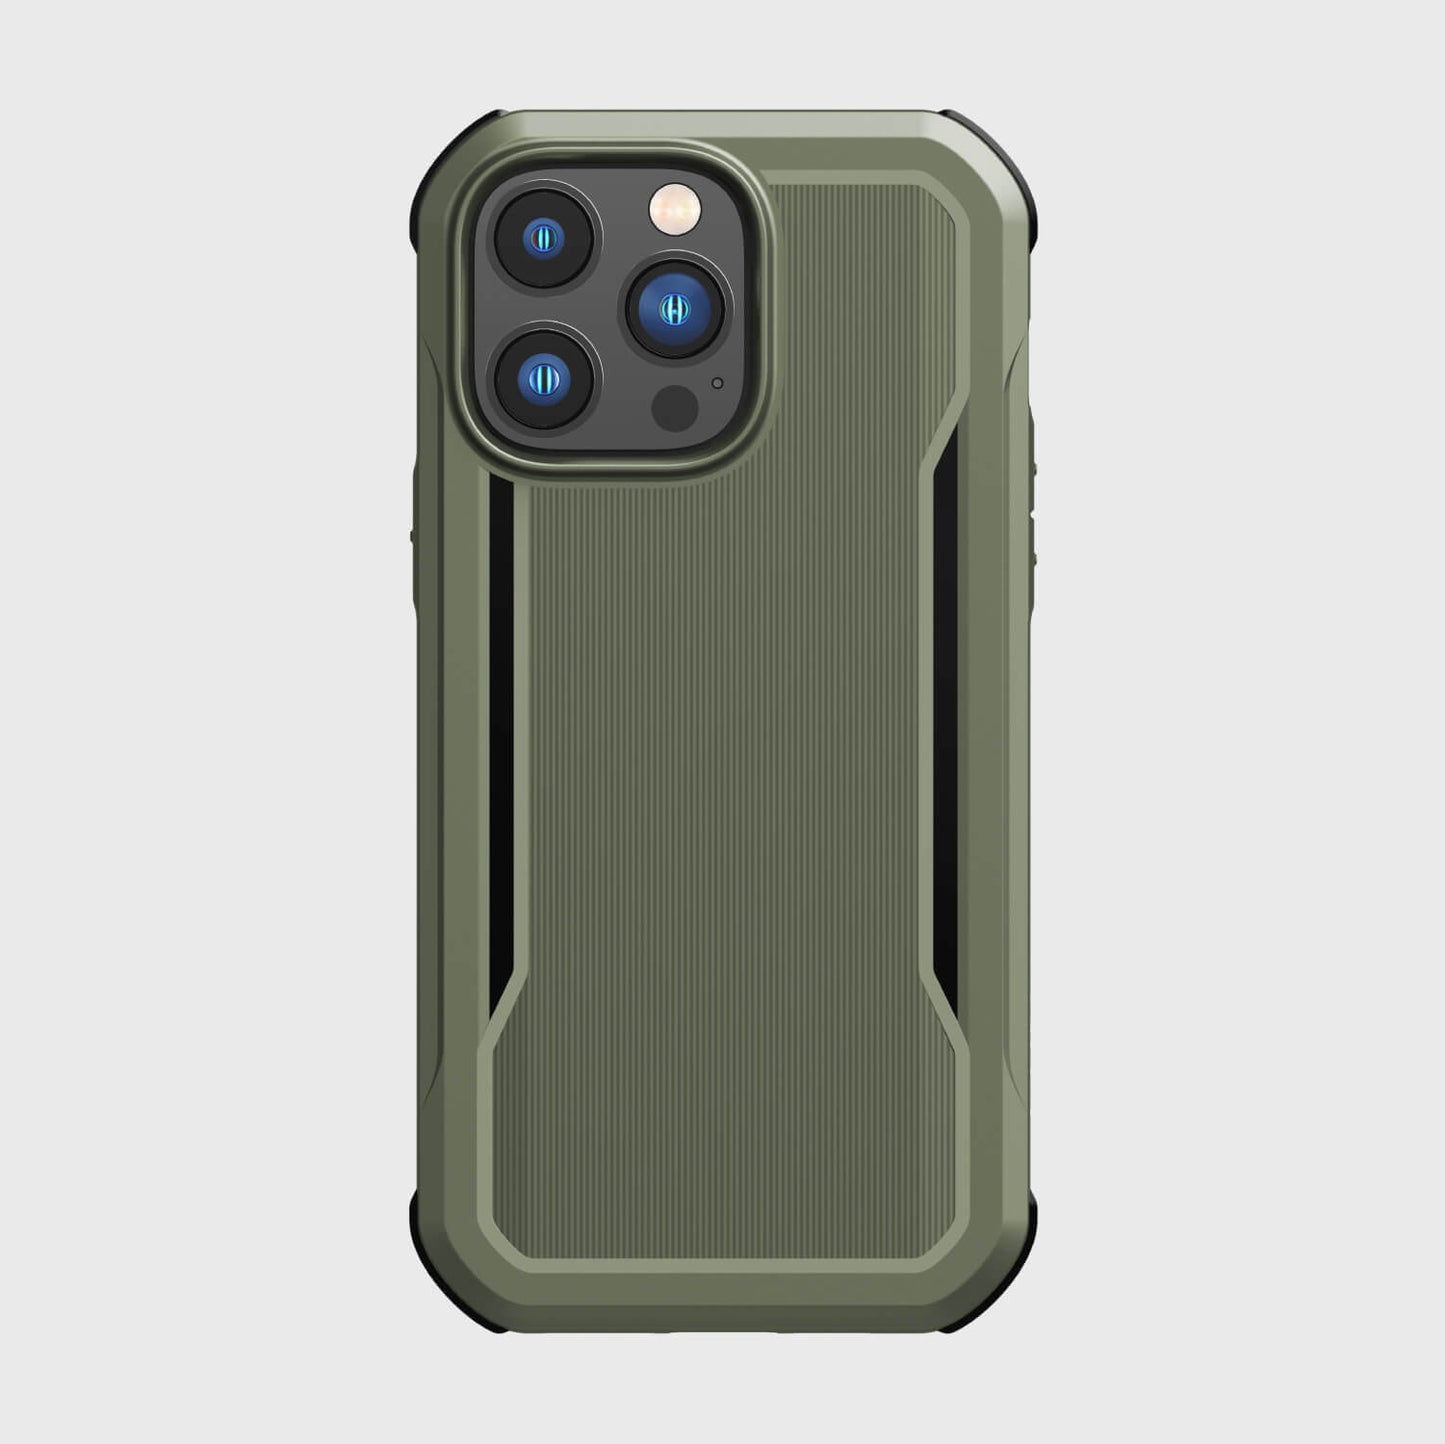 The Raptic iPhone 14/15 Pro Max Case - Fort Built for MagSafe in olive green offers military-grade drop protection and MagSafe compatibility.